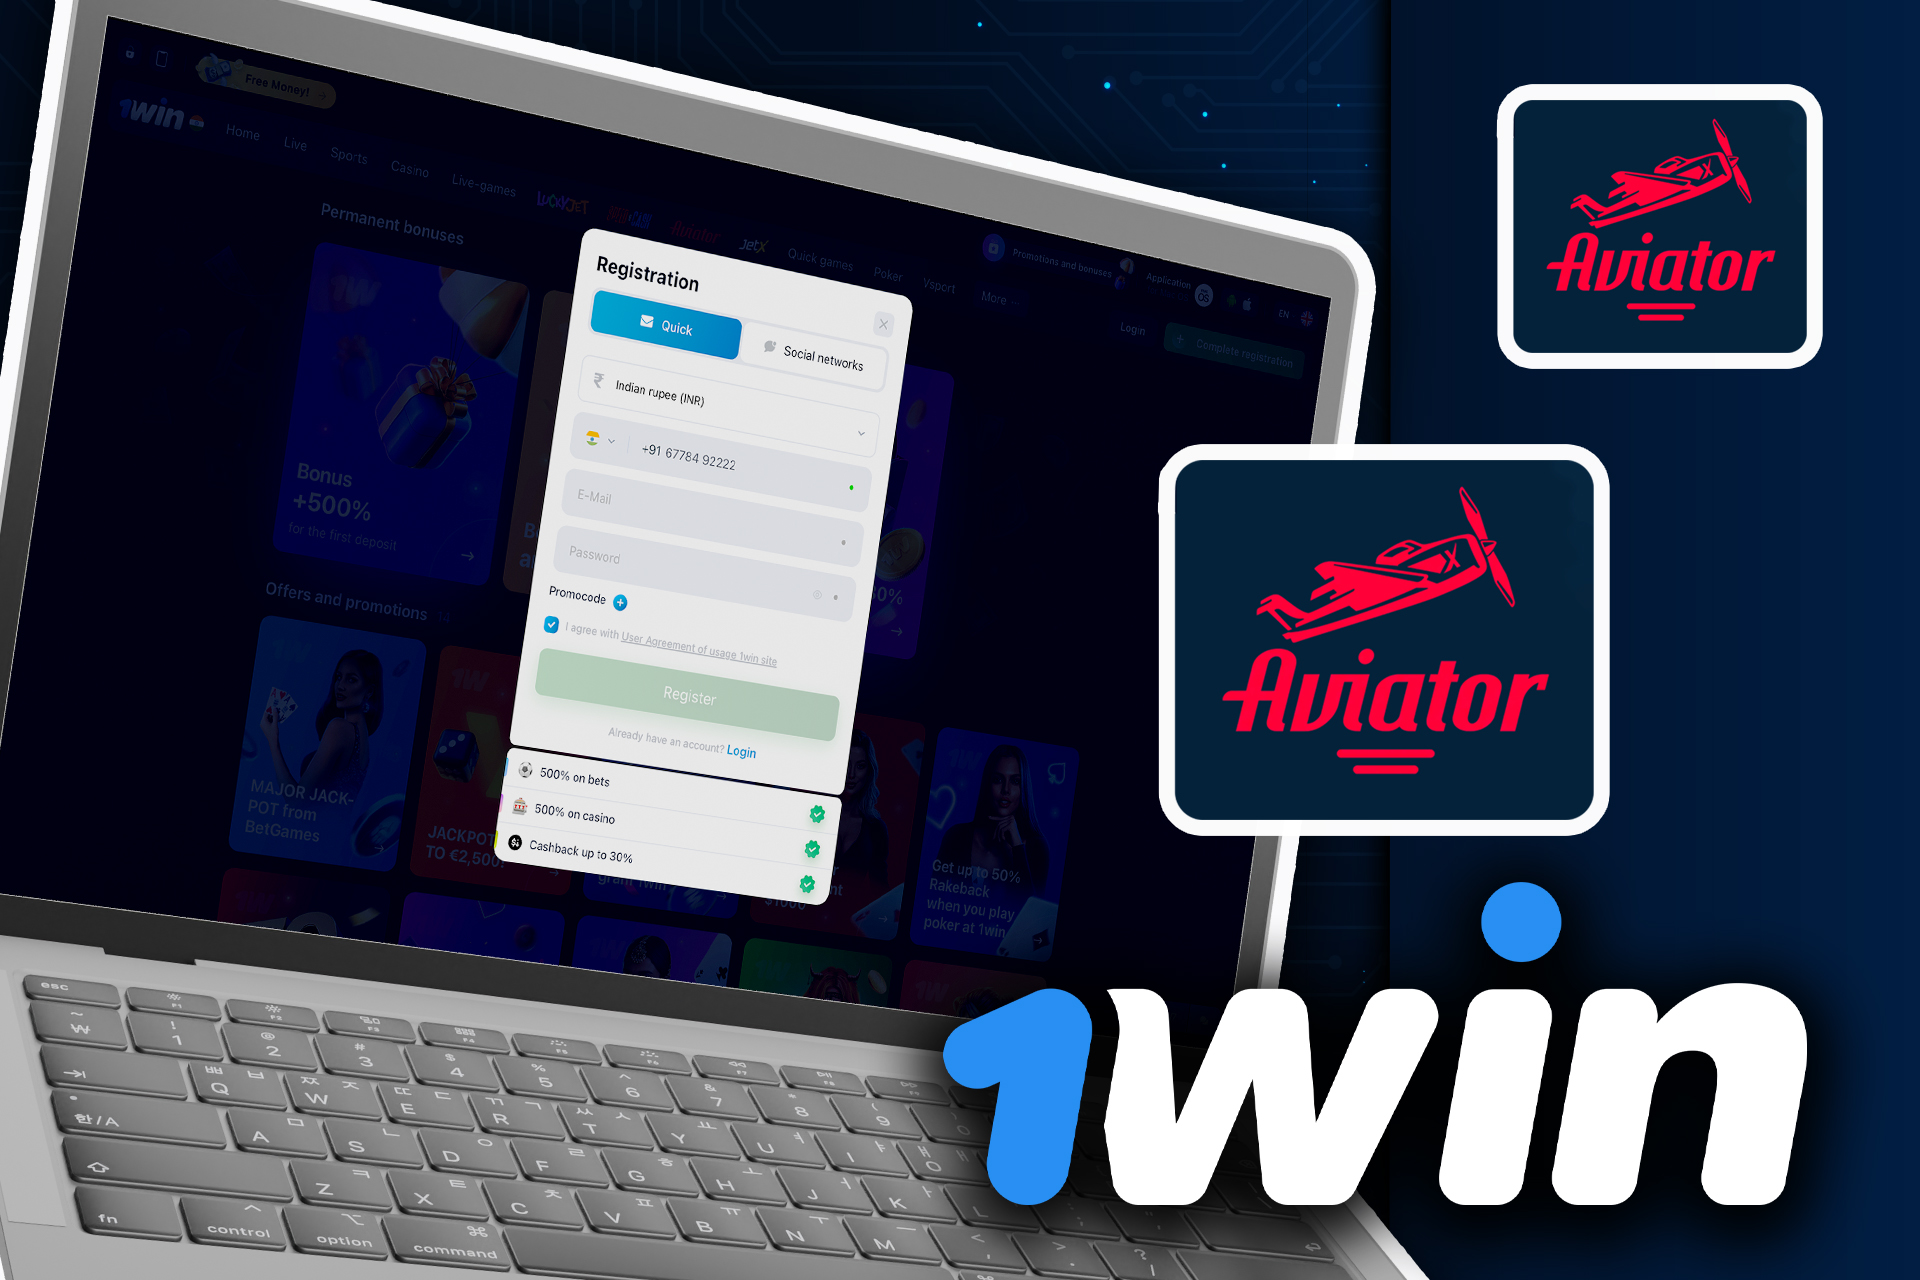 Open the 1win website, log in to your account, top it up and find the Aviator game to start playing.